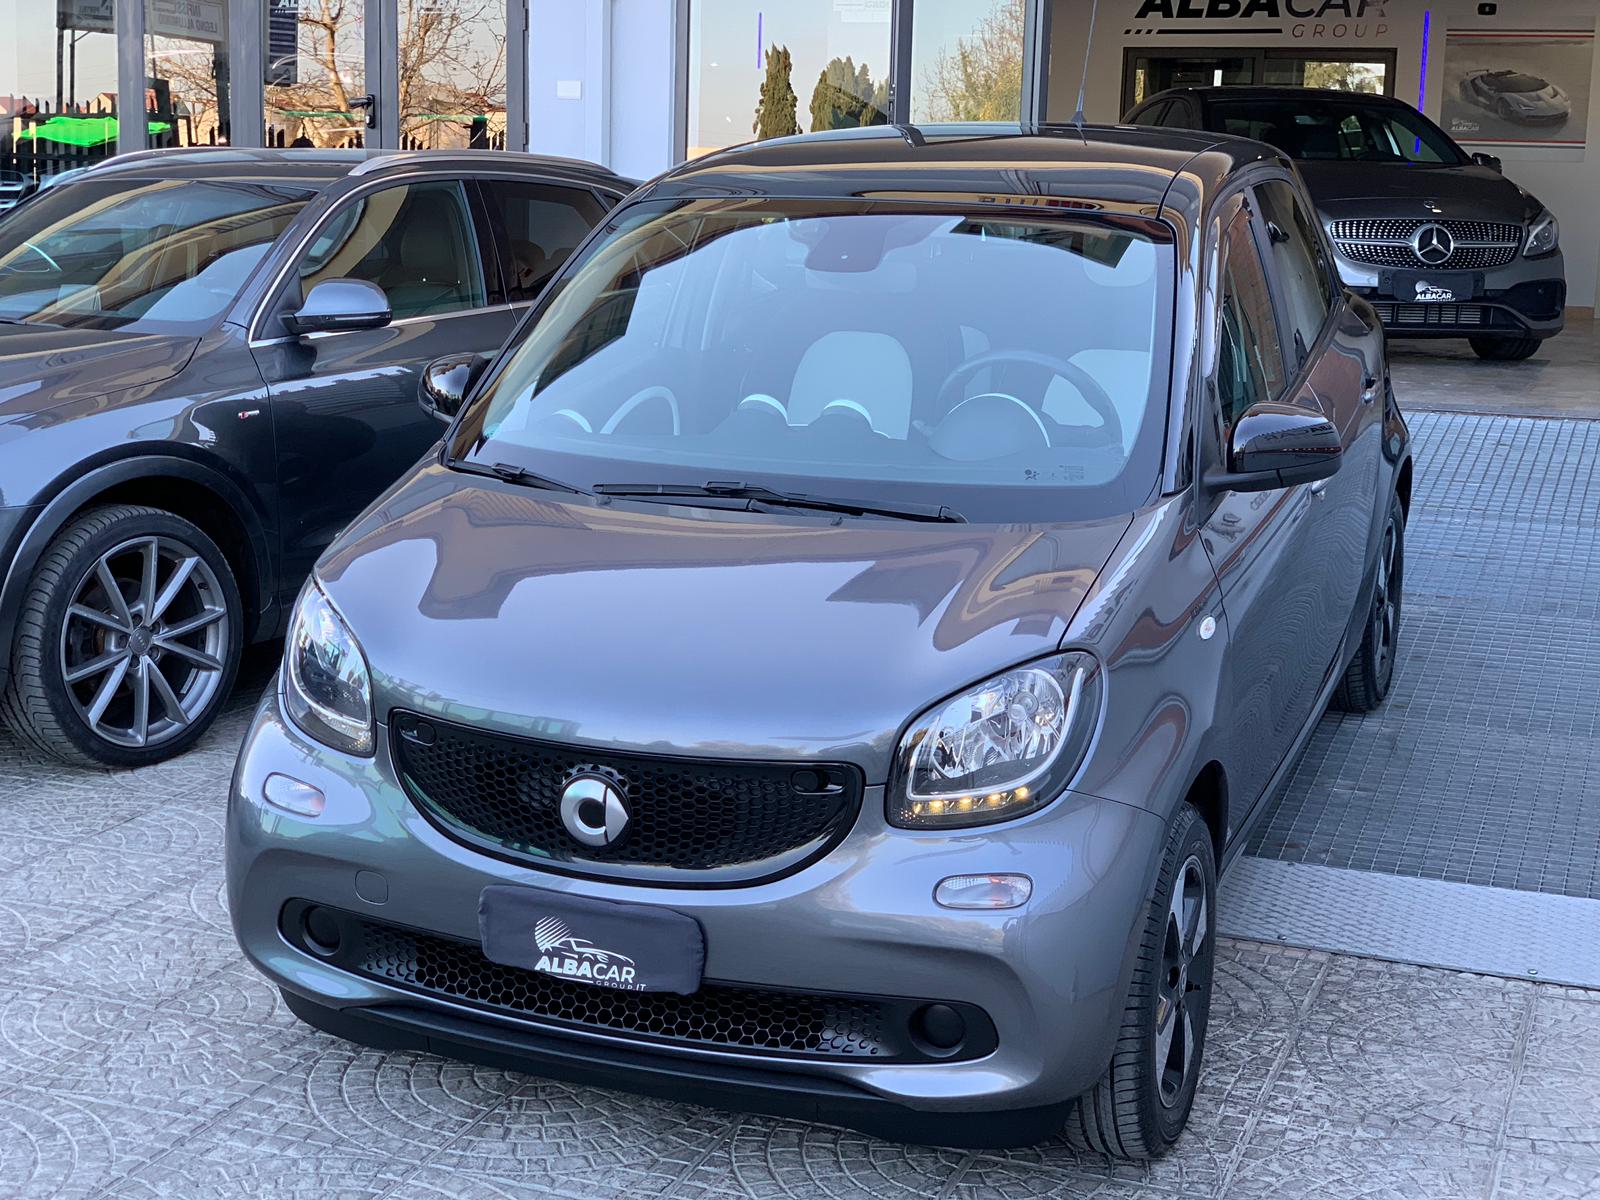 SMART ForFour PANO 1.0 PASSION Edition – AlbaCar Group